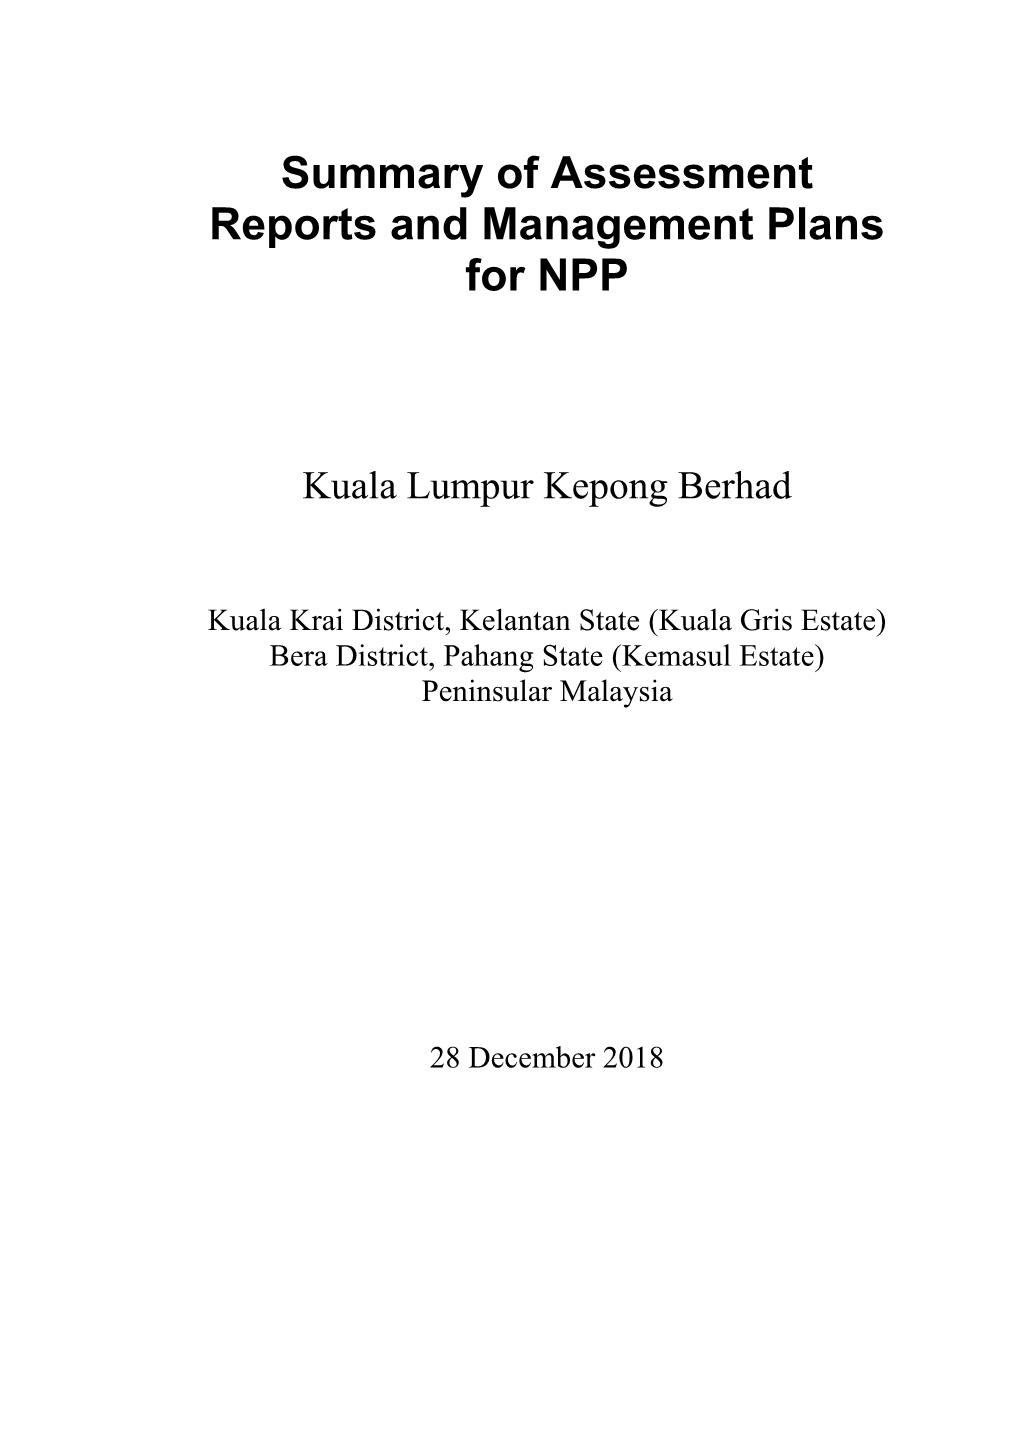 Summary of Assessment Reports and Management Plans for NPP